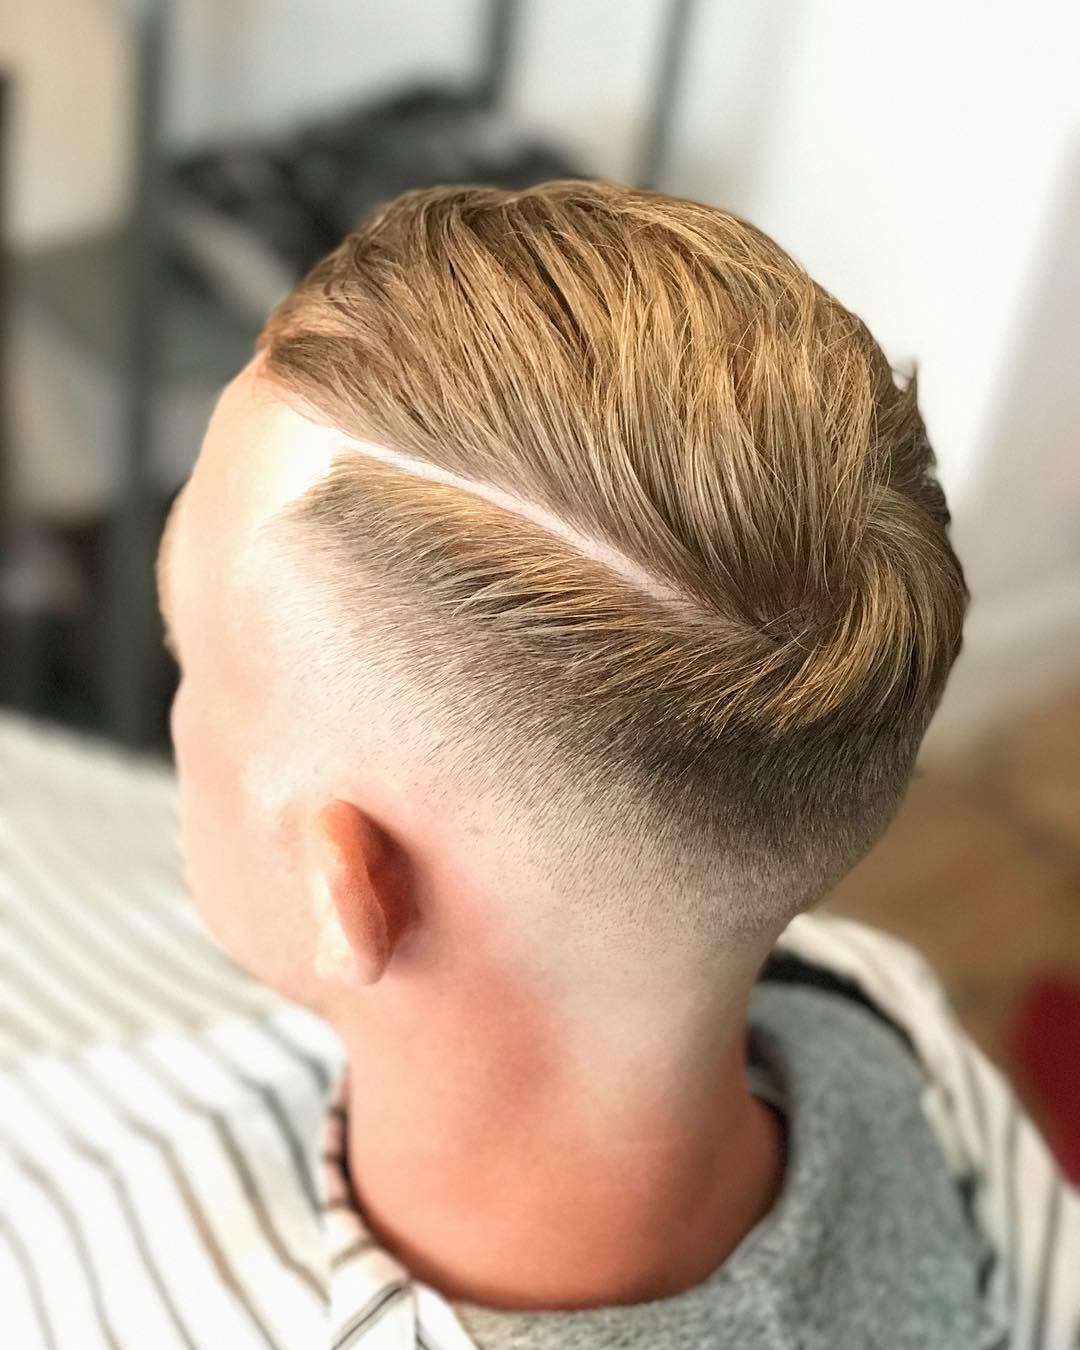 Comb over haircut with mid fade and hard part